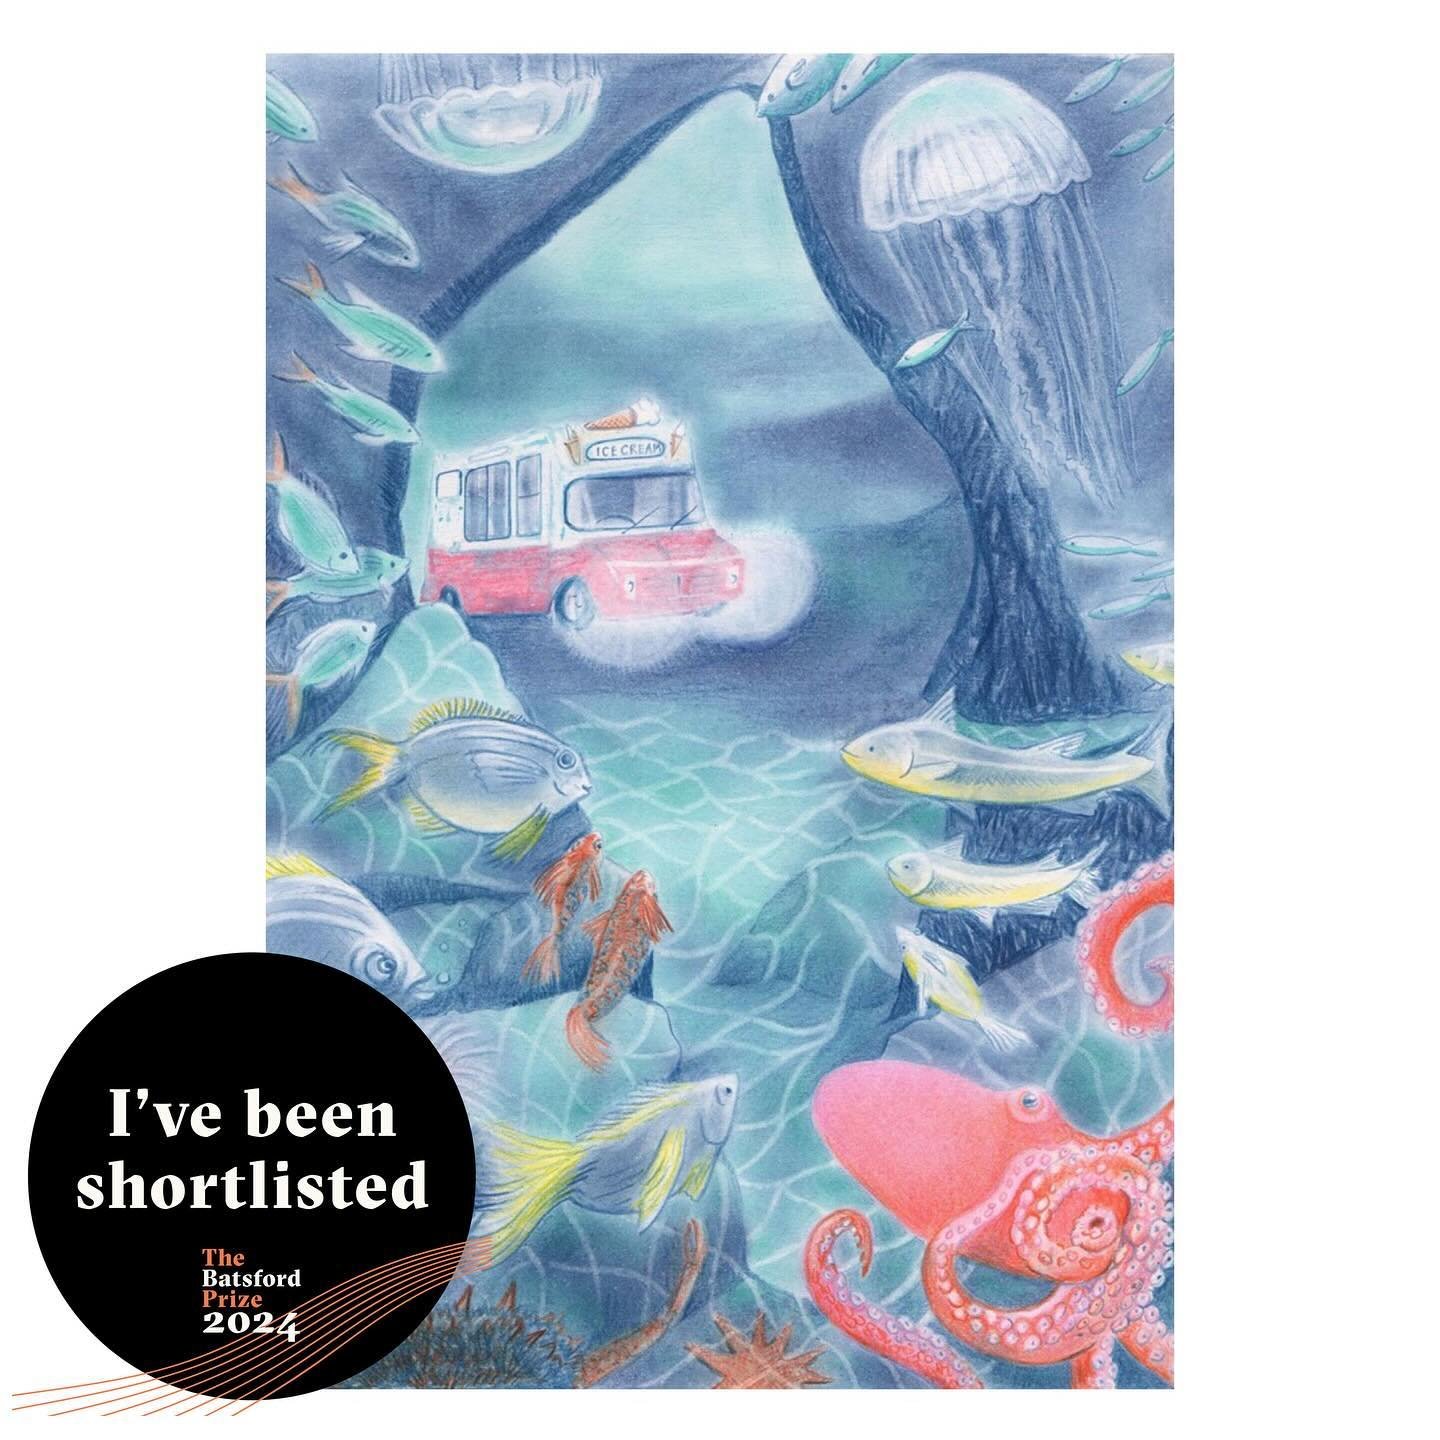 Thrilled that my MA project &lsquo;Mr Octo&rsquo;s Ice Creams has been shortlisted for the #BatsfordPrize Thank you @batsfordbooks 🍦🤩🍦 

I loved creating this wordless book and am honoured to be shortlisted alongside so many of my talented @csacbi